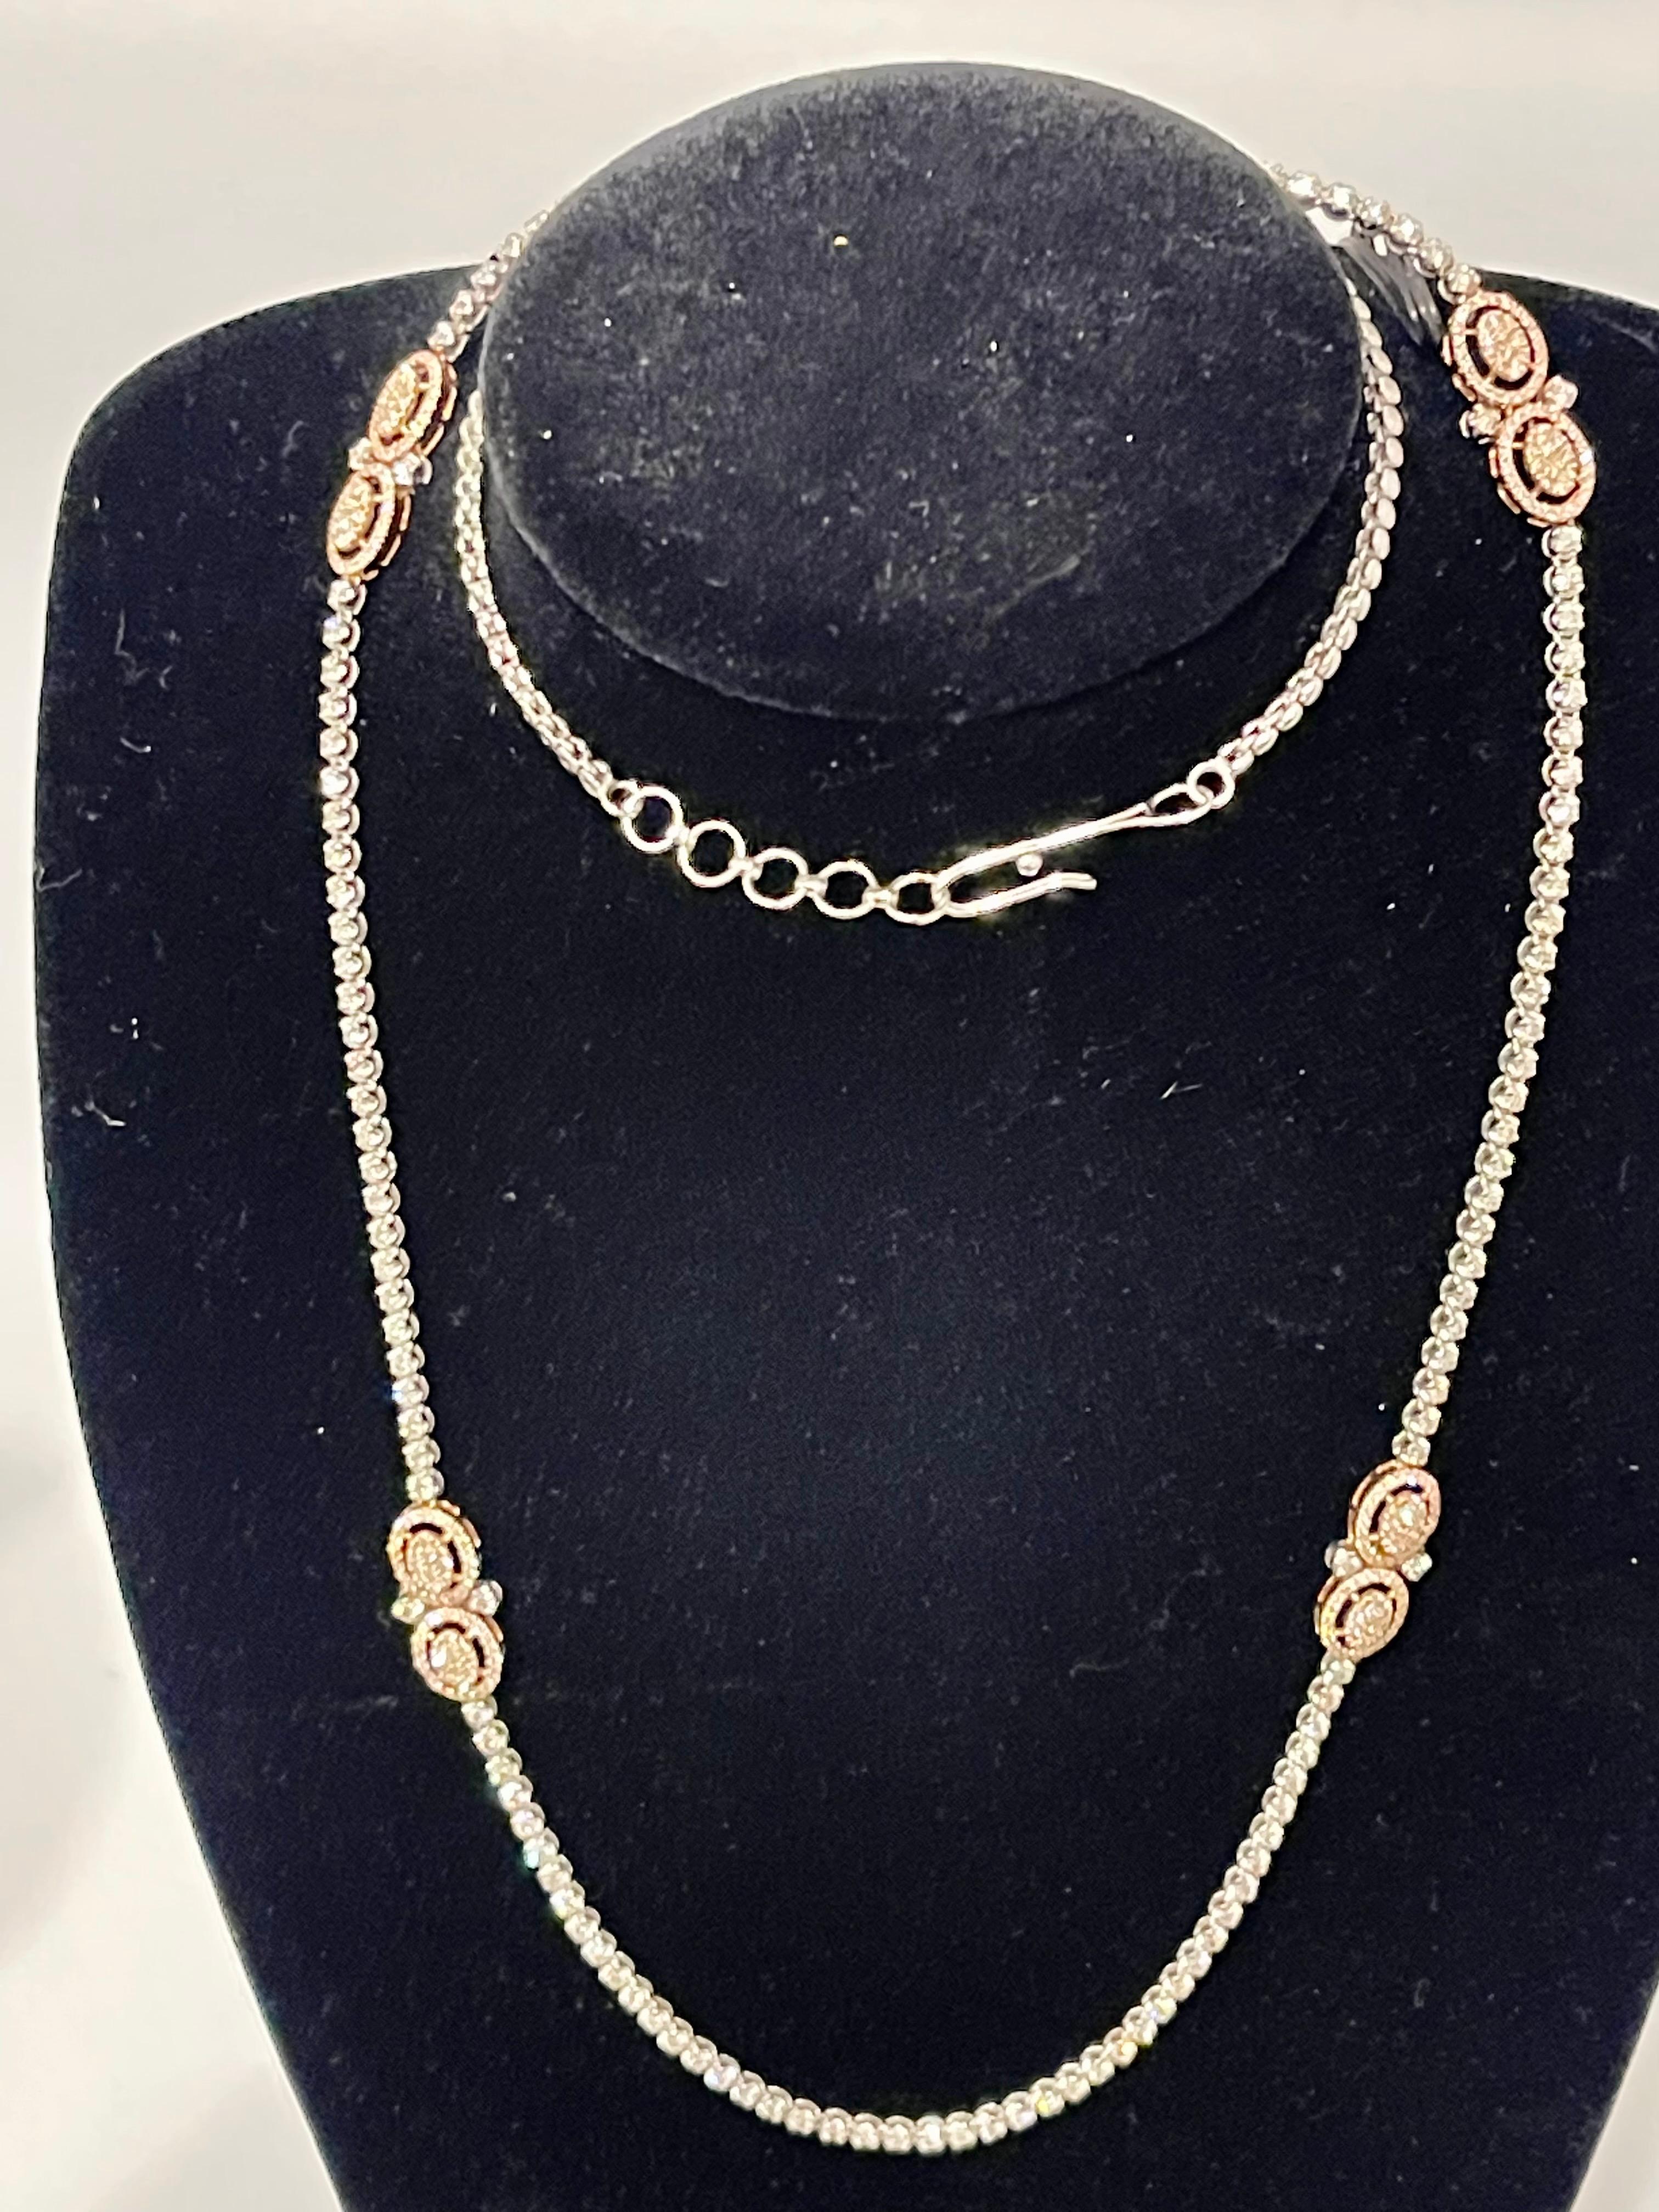 8 Ct Brilliant Cut Diamond Long Necklace in White & Pink 14 K Gold 27 Gm 6